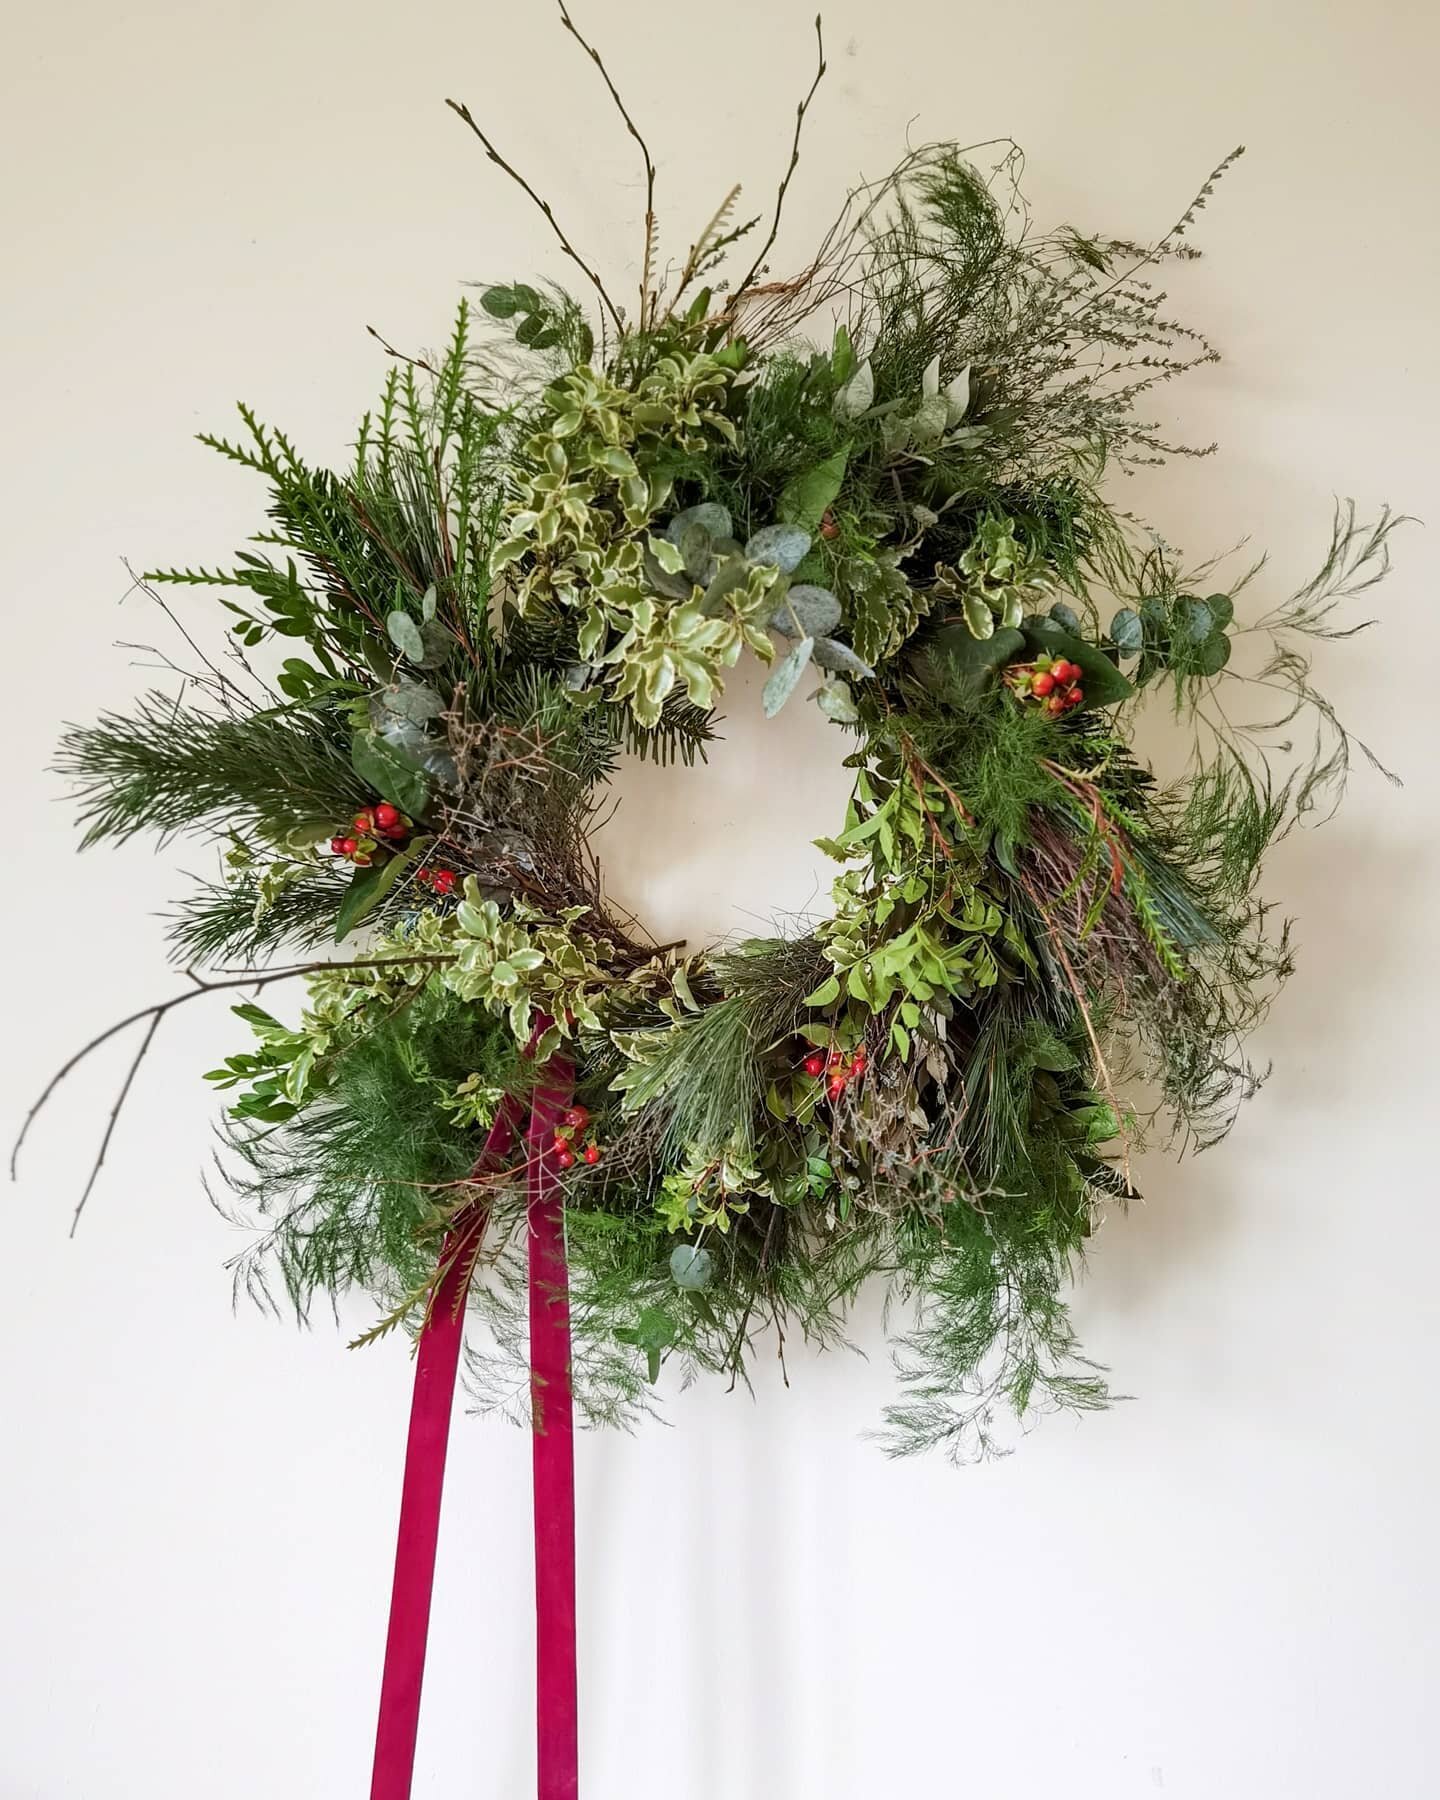 We've been busy little elves creating lots of gorgeous wreaths for Blenheim Palace this weekend. If you want to buy a tree and wreath pop down to the Palace on Fri/Sat/Sun to buy one. 🎄 Absolutely in love with this wild and natural wreath full of as